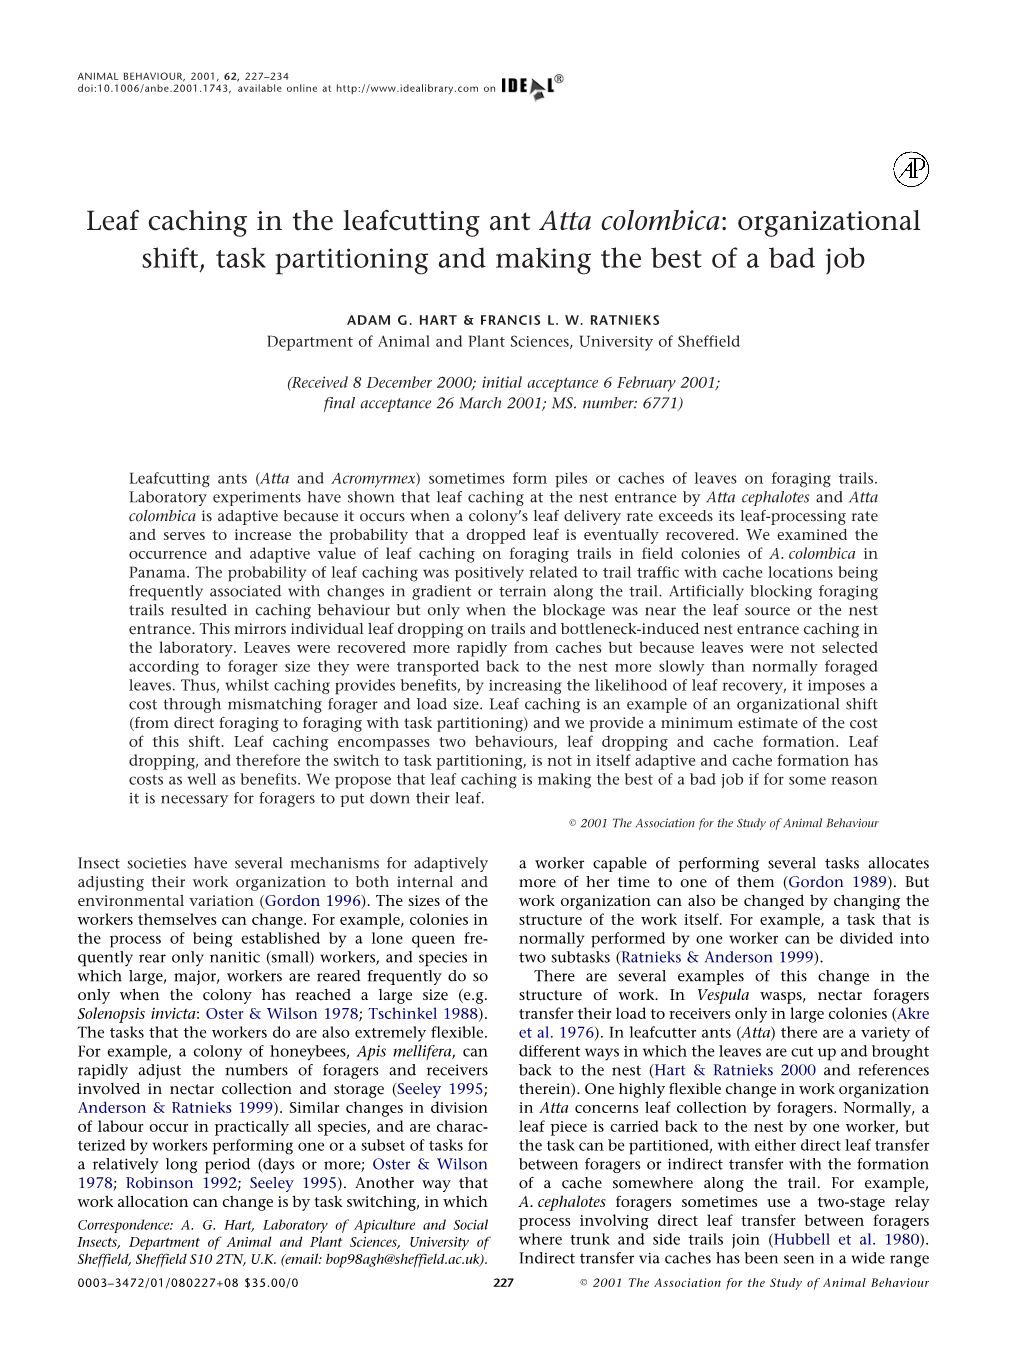 Leaf Caching in the Leafcutting Ant Atta Colombica: Organizational Shift, Task Partitioning and Making the Best of a Bad Job